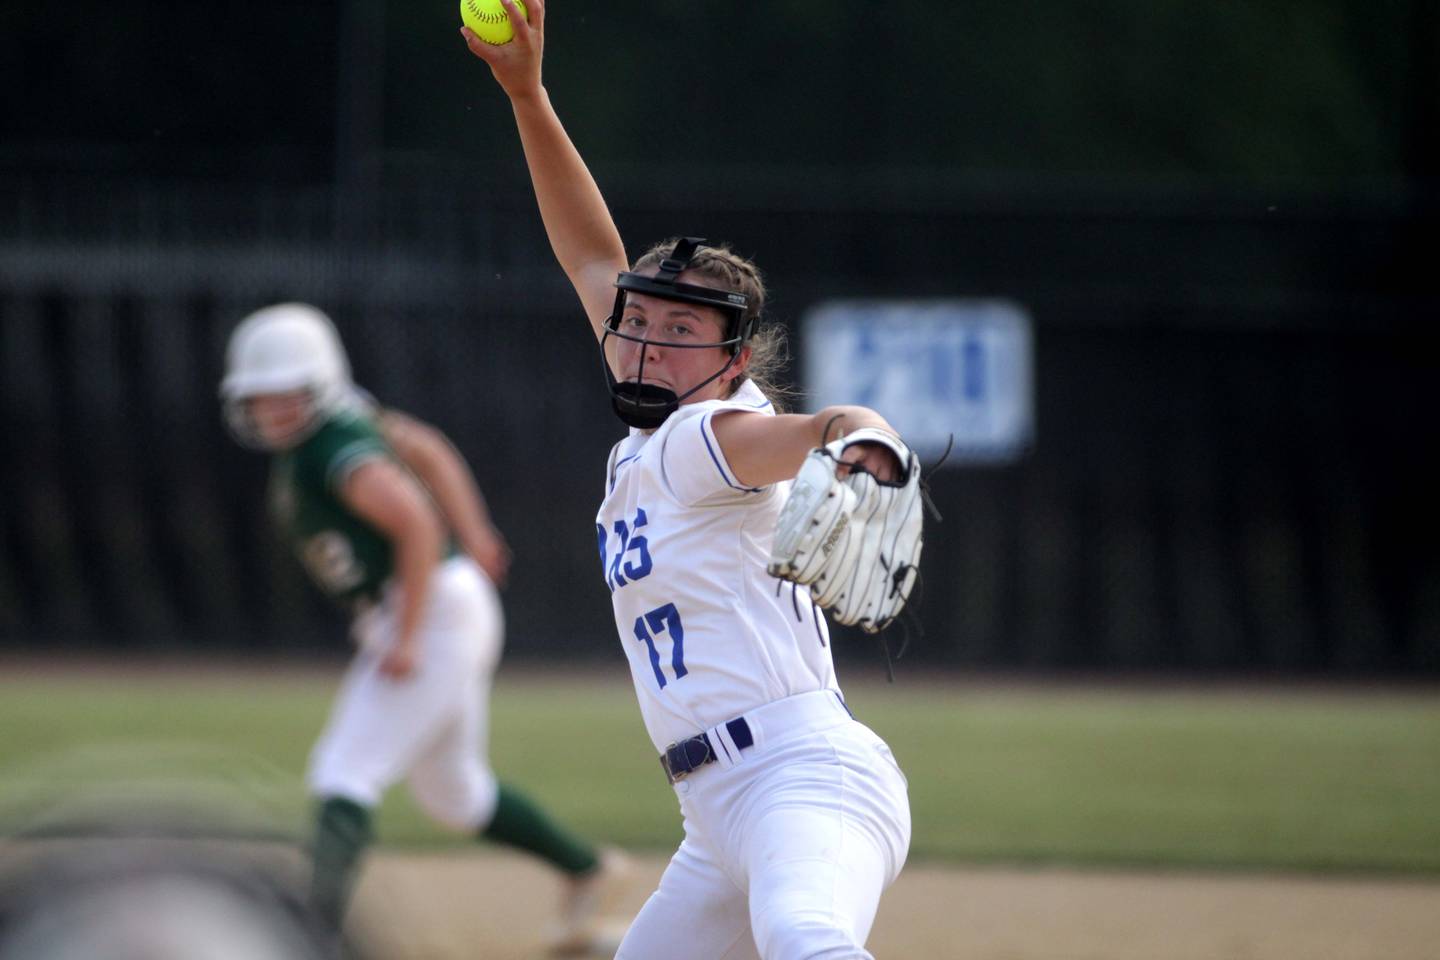 St. Charles North’s Ava Goettel pitches against Fremd in a Class 4A St. Charles North Sectional semifinal on Tuesday, May 30, 2023.